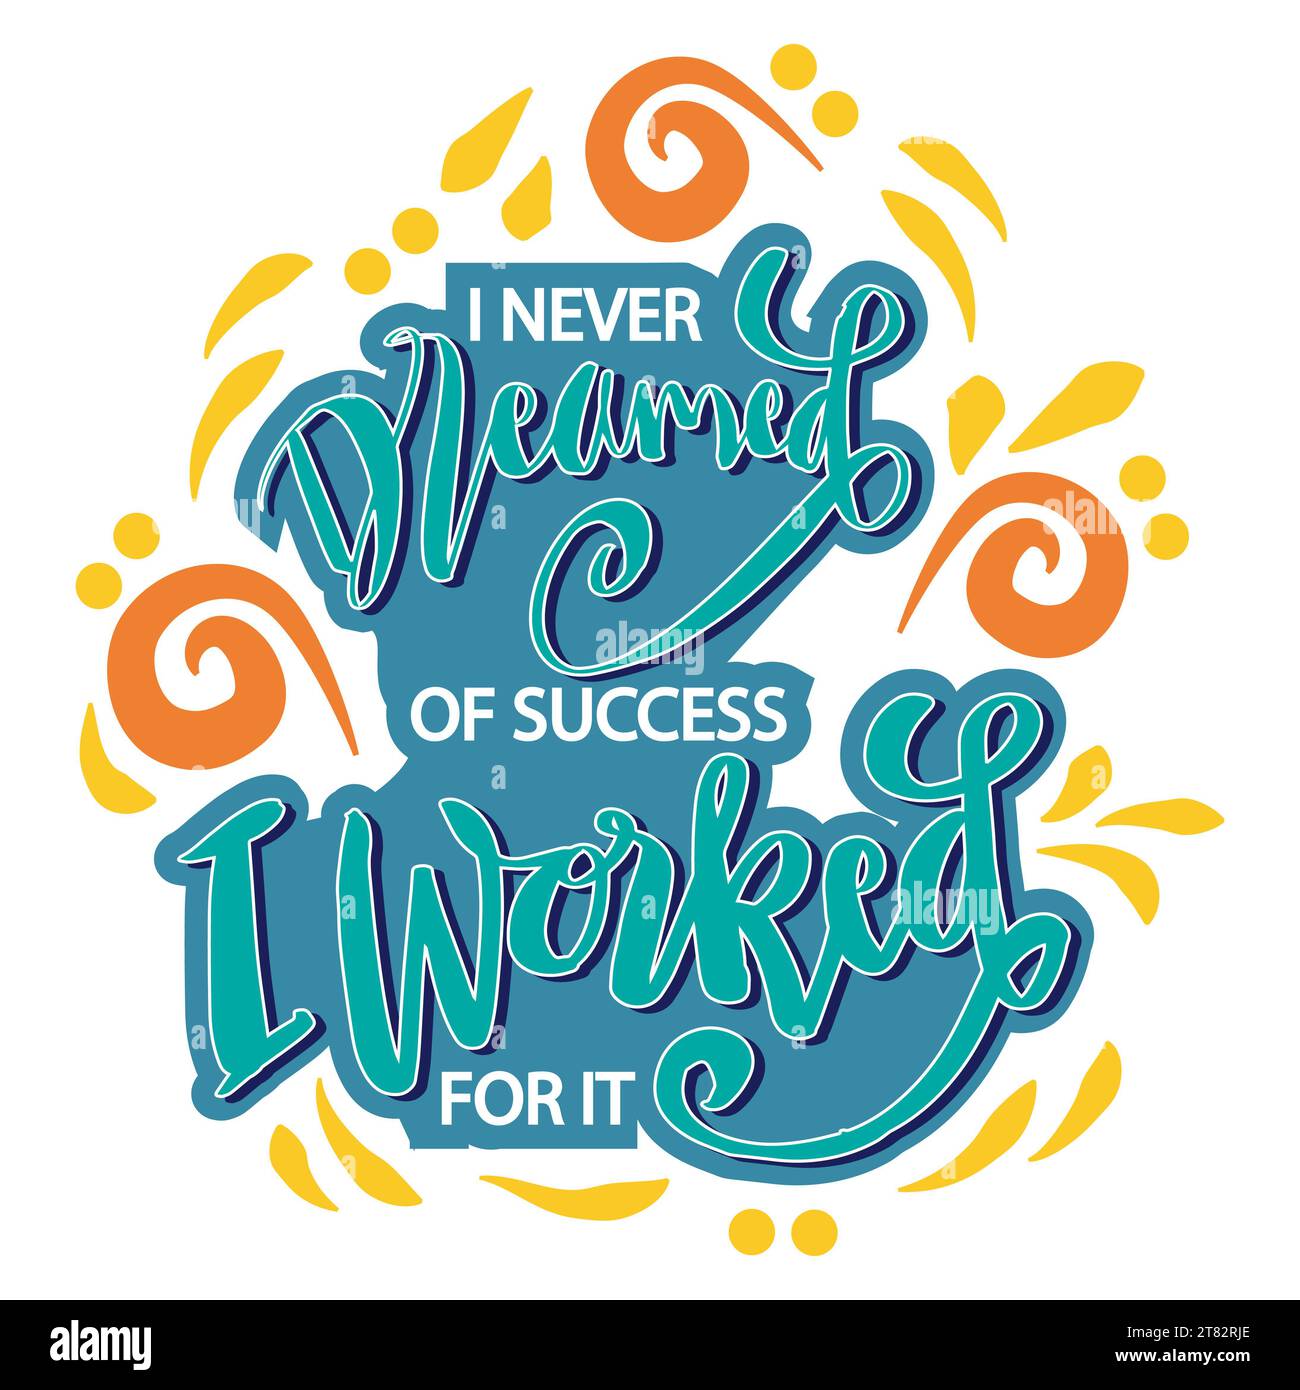 I never dreamed of success I worked for it. Poster quotes. I never dreamed of success I worked for it. Poster quotes. Stock Photo